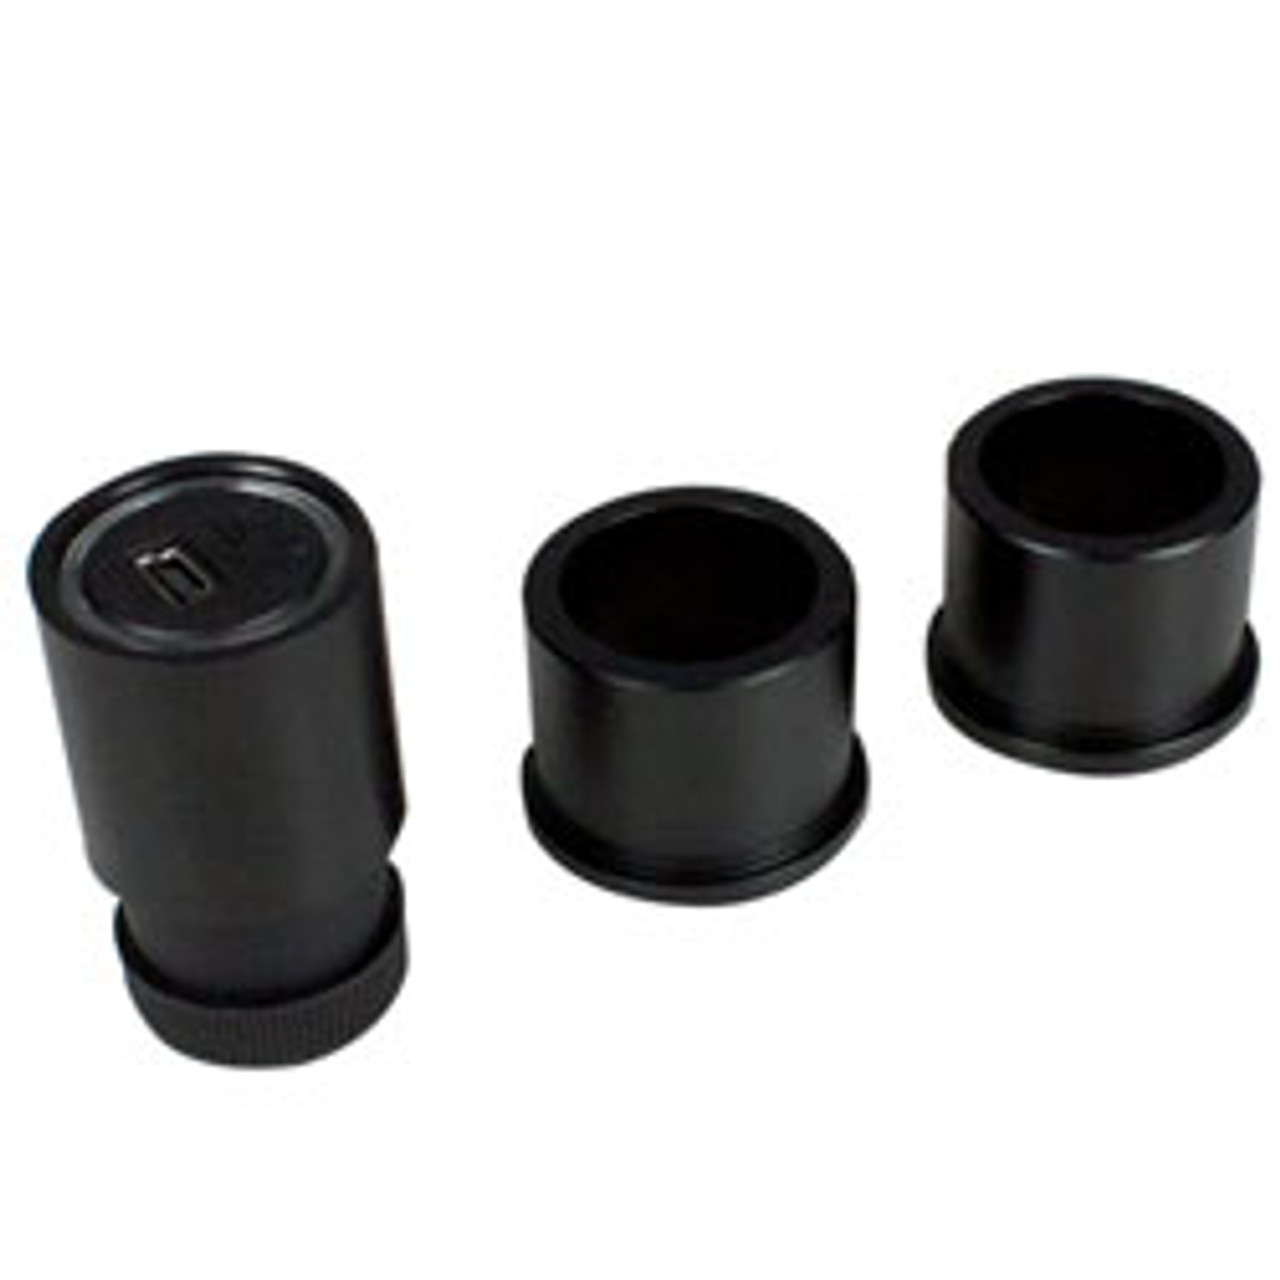 Walter Products 2MP Industrial Built-In Eyepiece Camera